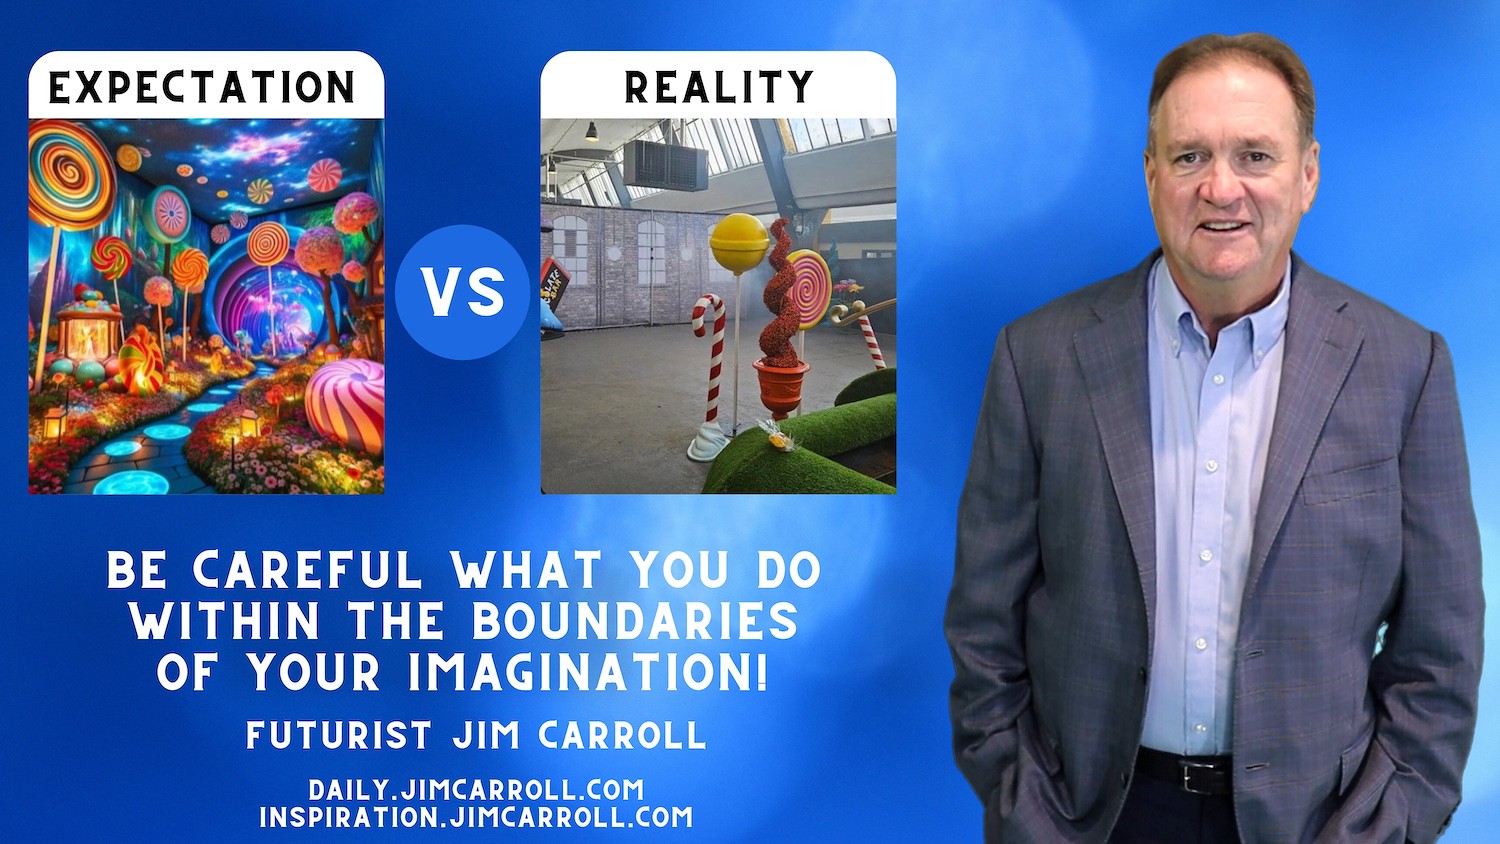 "Be careful what you do within the boundaries of your imagination!"- Futurist Jim Carroll